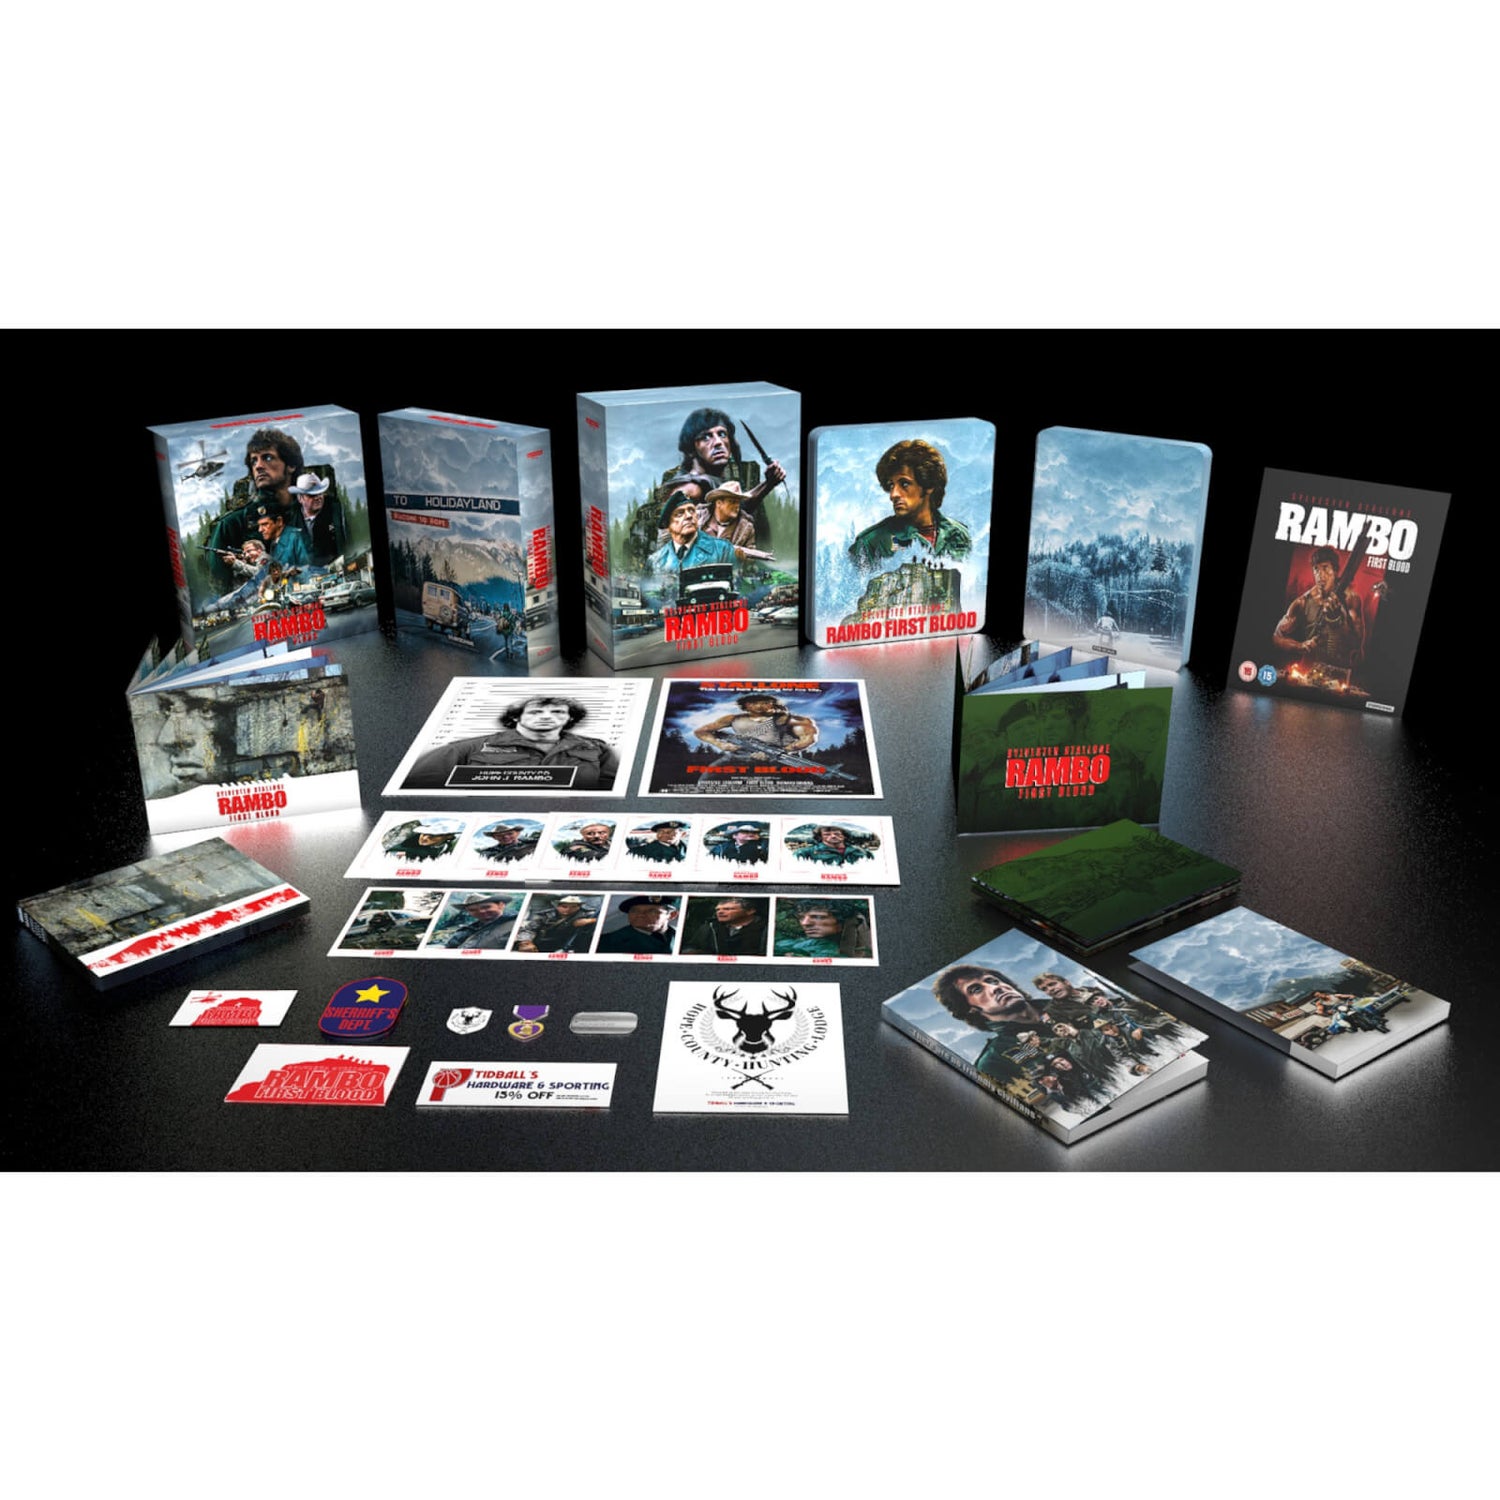 Rambo : First Blood Steelbook 4K Ultra HD Édition Collector